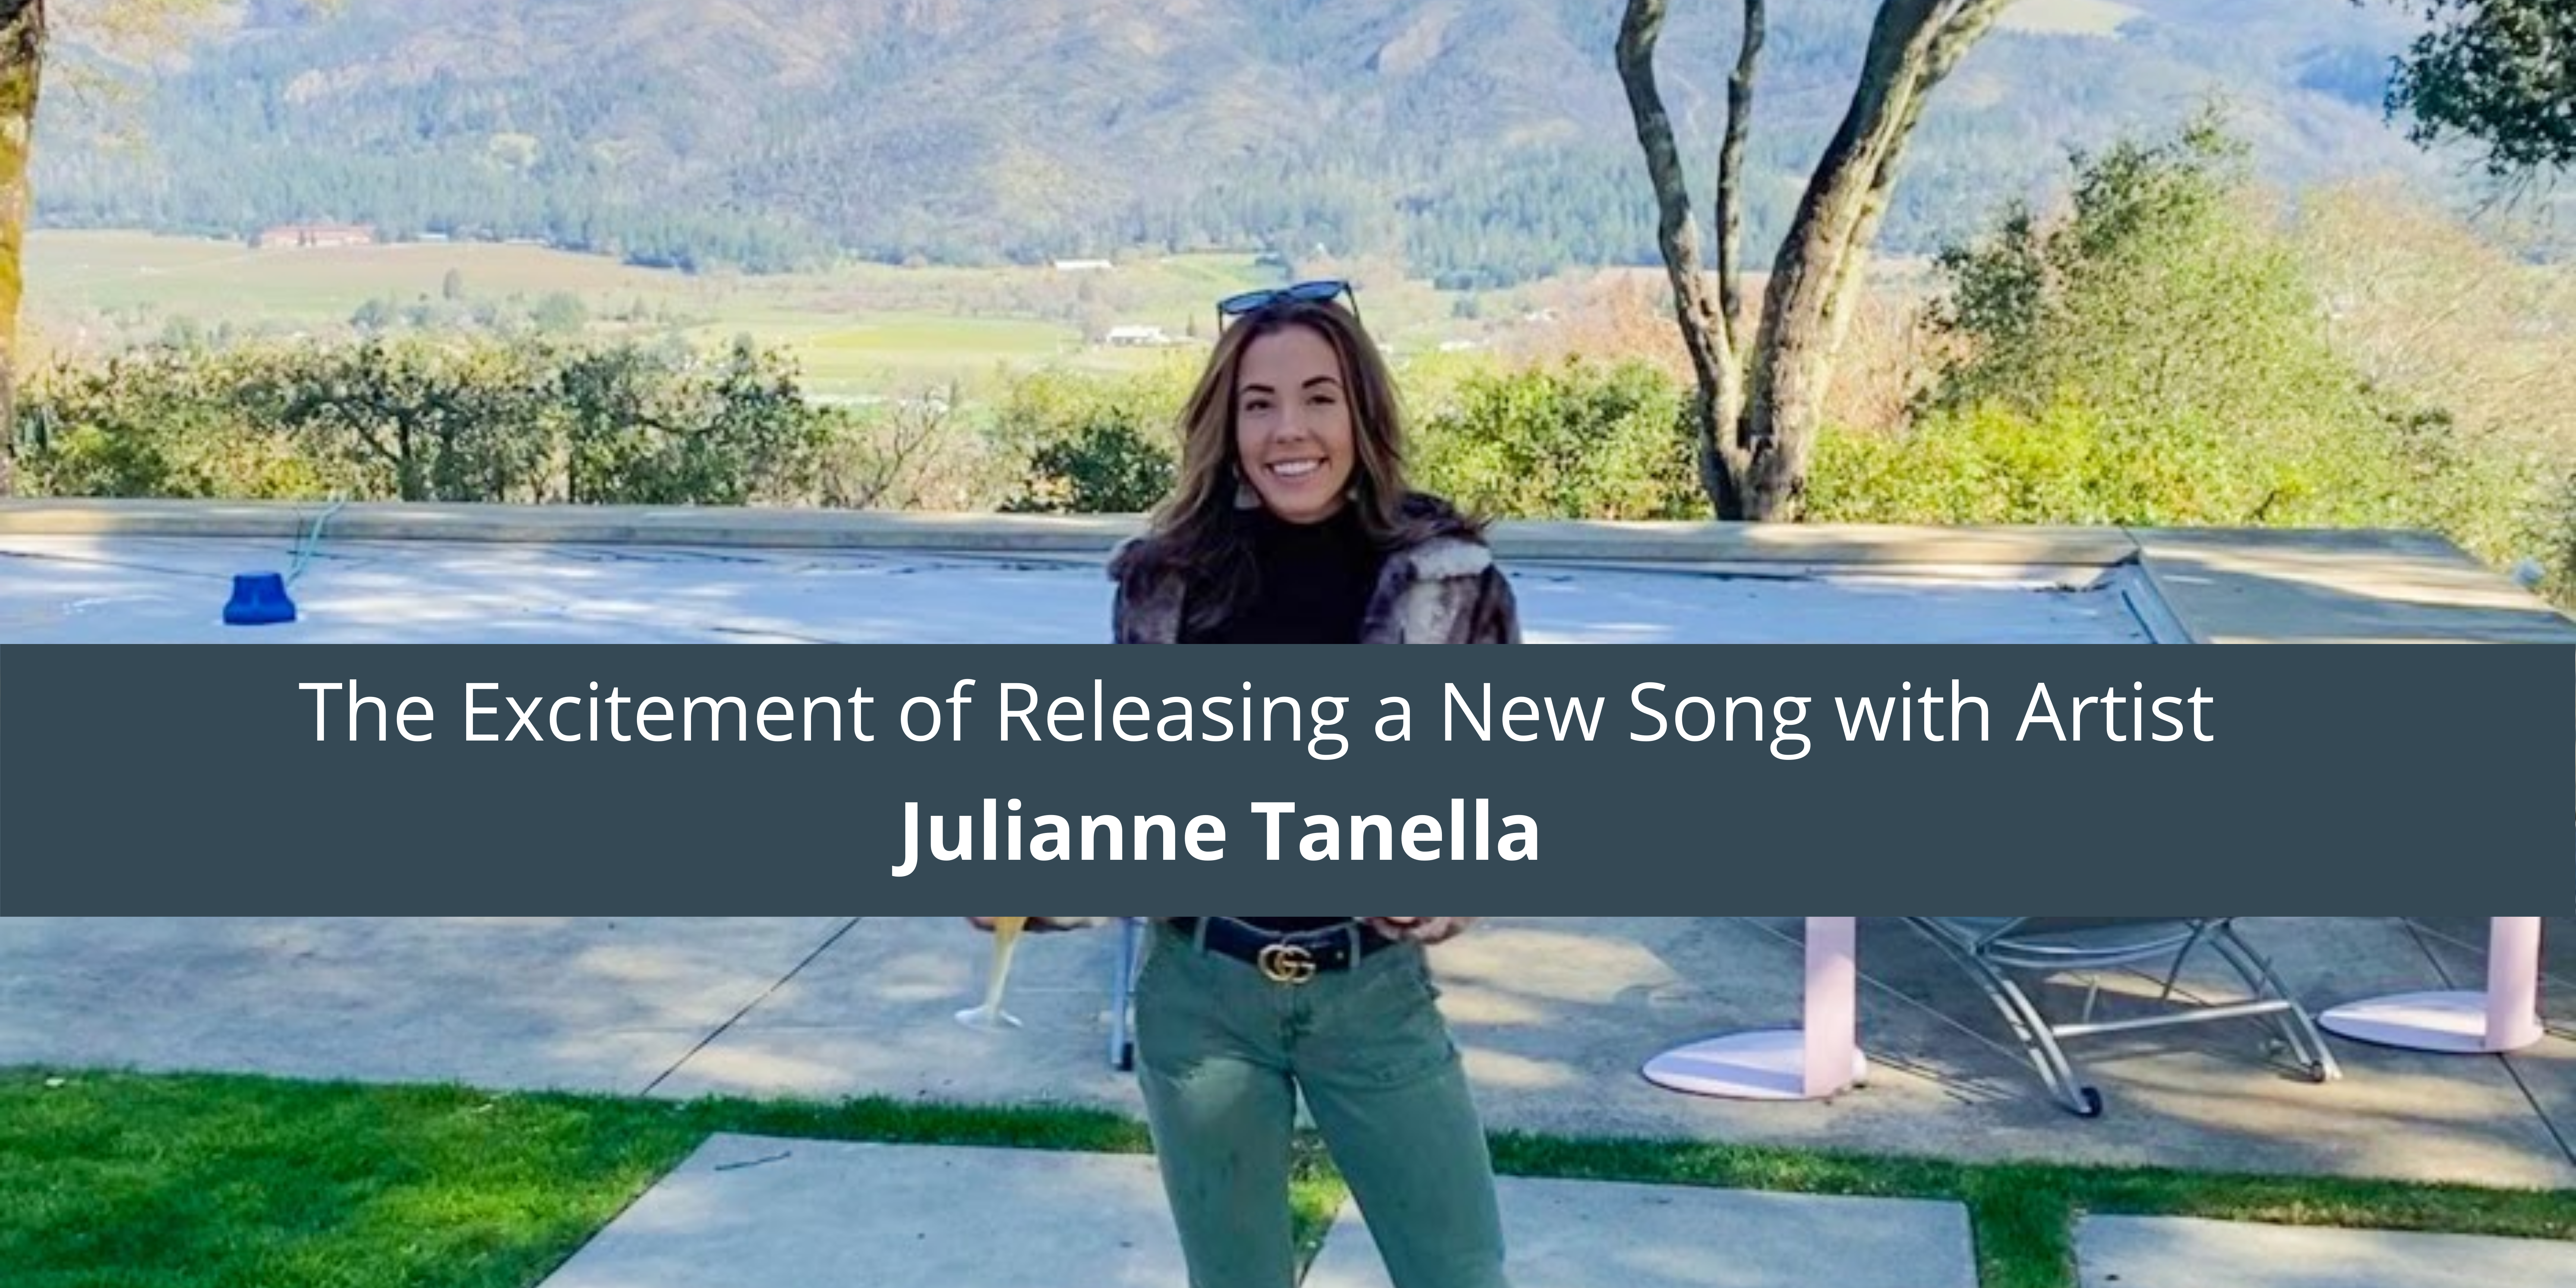 The Excitement of Releasing a New Song with Artist Julianne Tanella